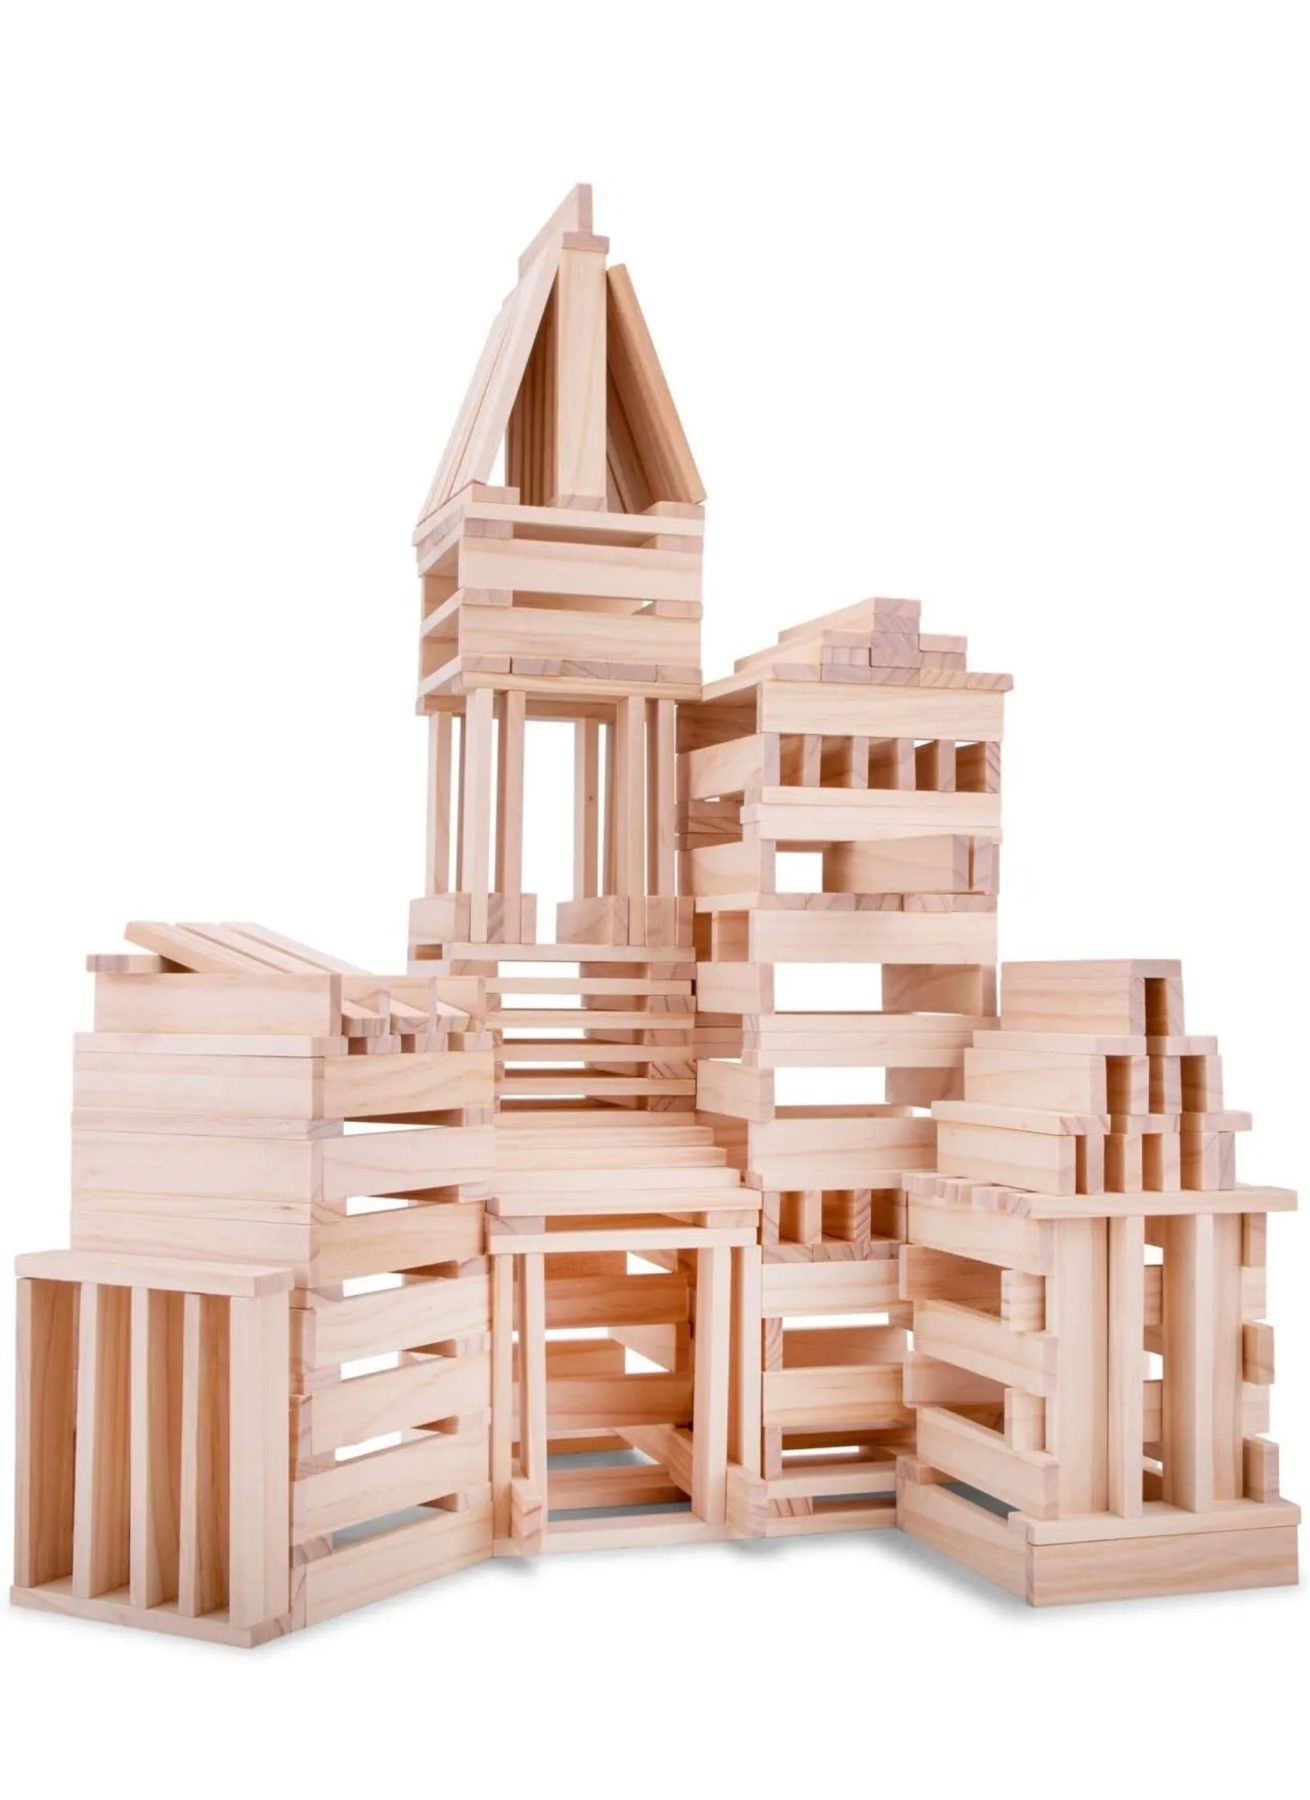 Planks2Play 250-Piece Wooden Building Set - Natural Mixed Box for Educational Creative Play